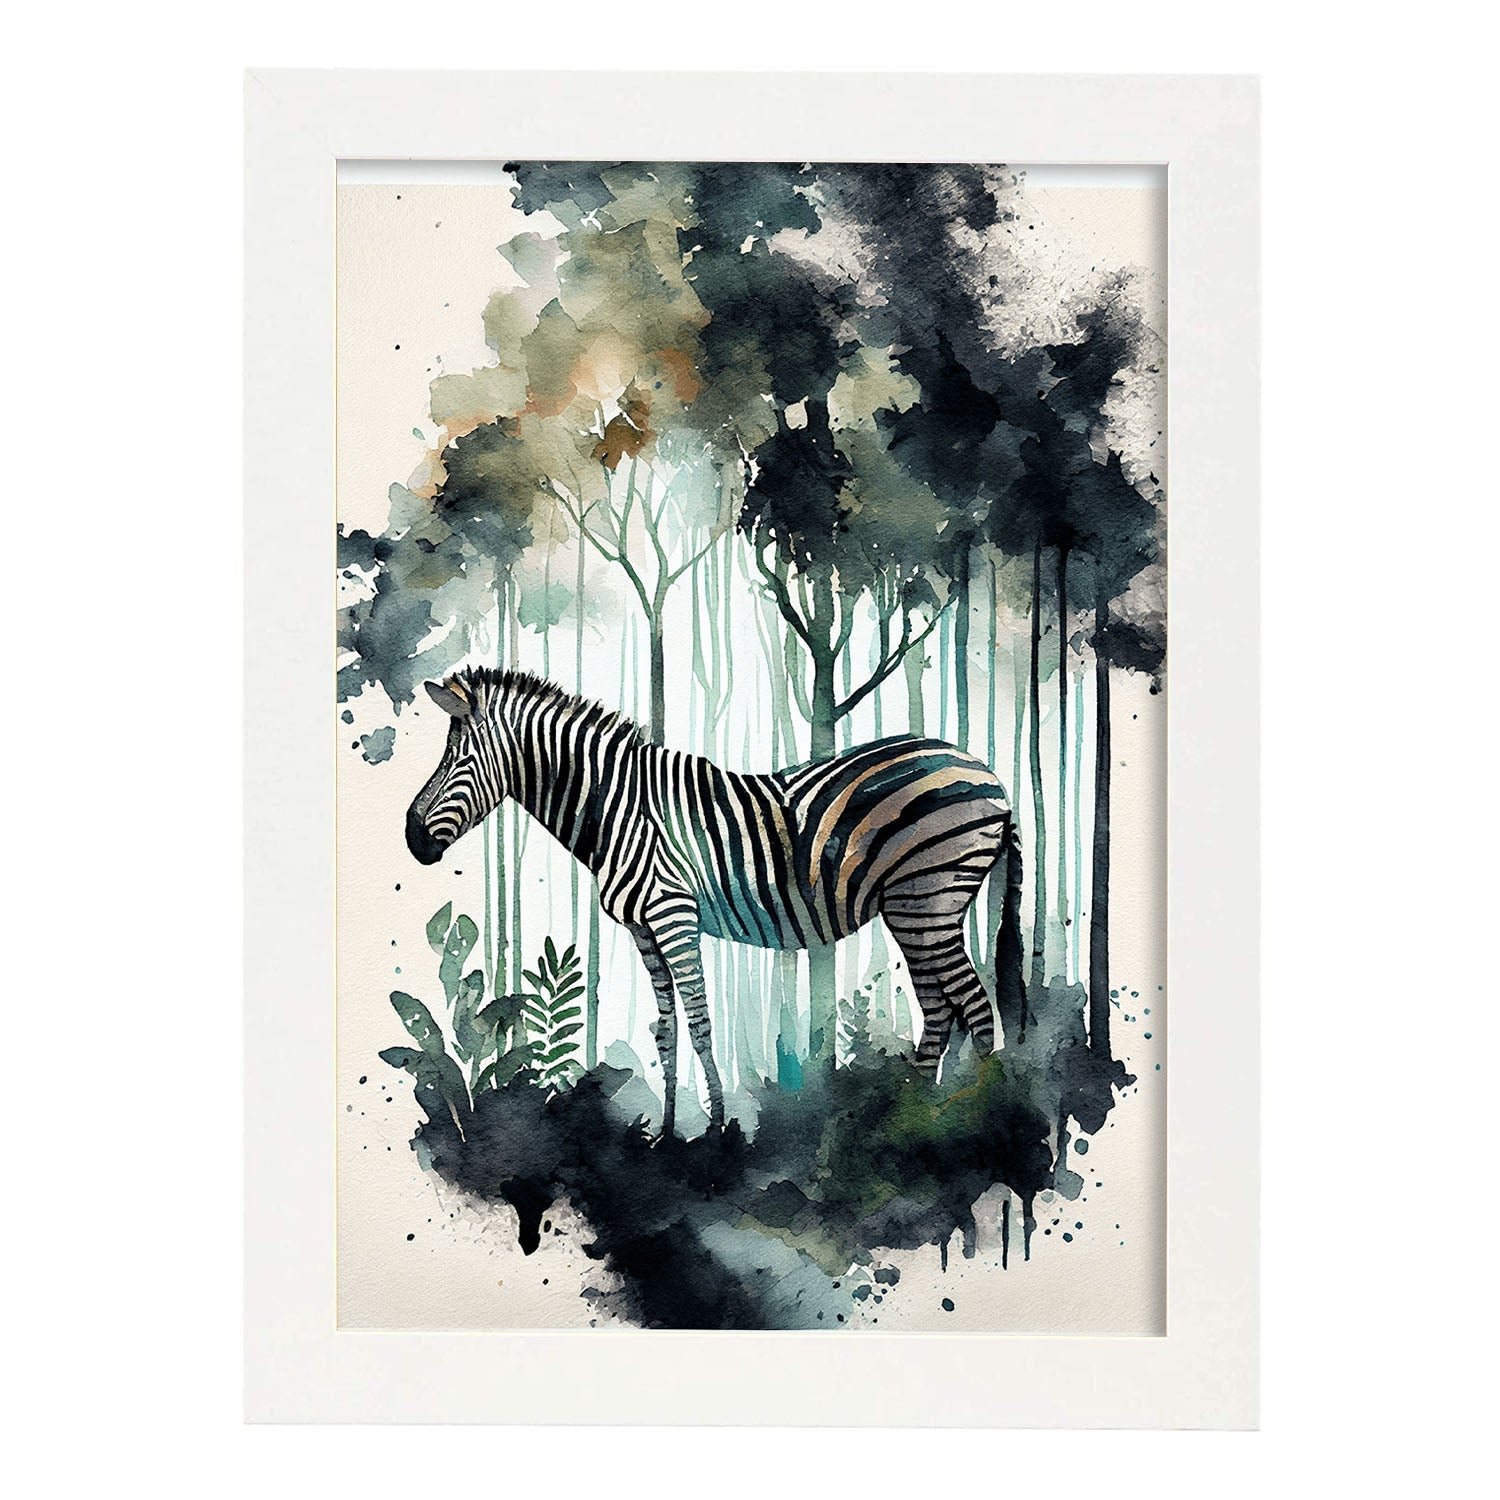 Nacnic Watercolor of Zebra in the forest. Aesthetic Wall Art Prints for Bedroom or Living Room Design.-Artwork-Nacnic-A4-Marco Blanco-Nacnic Estudio SL